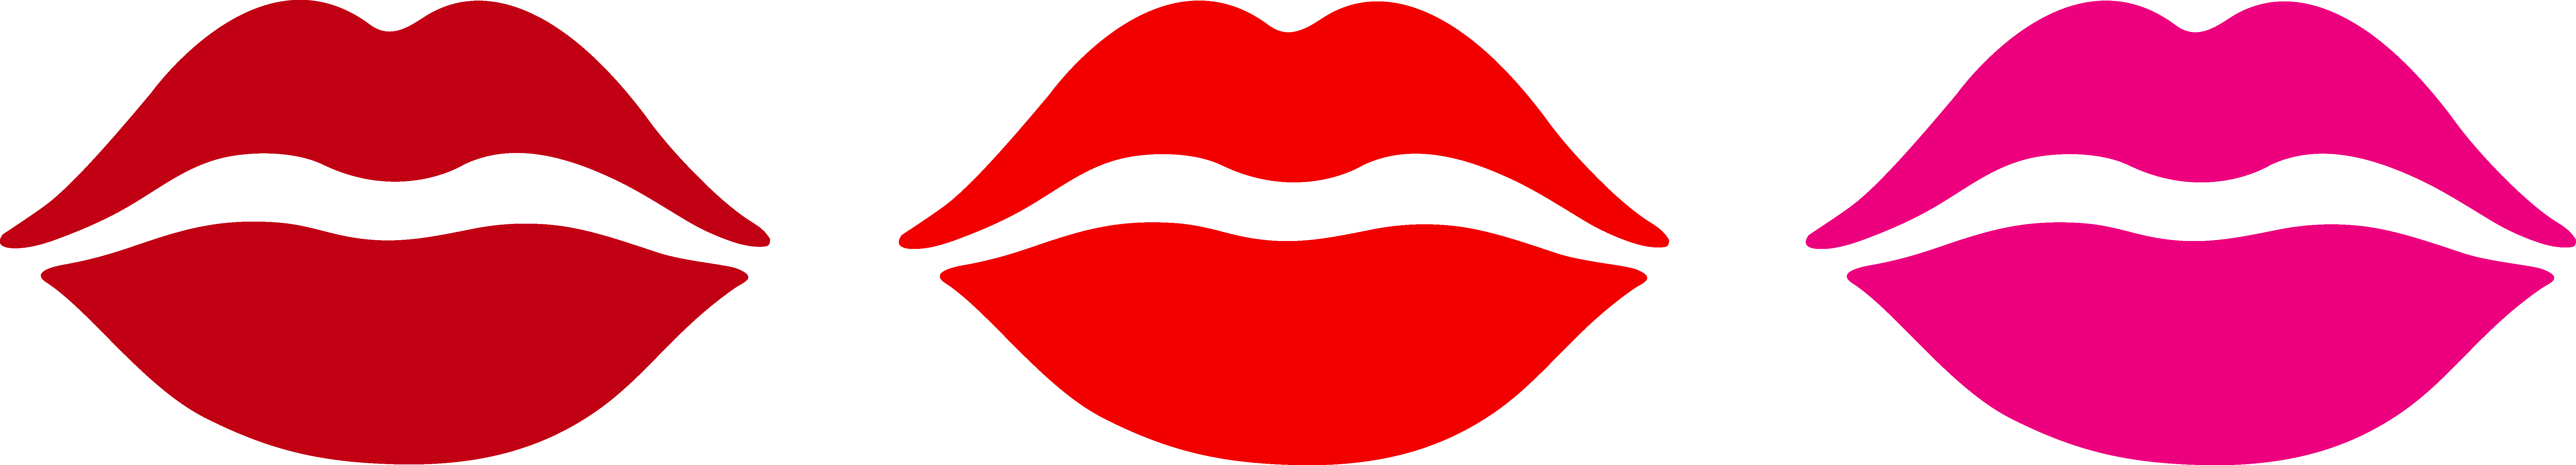 Images For Lipstick Kiss On Face Cartoon Clipart Best Clipart Best